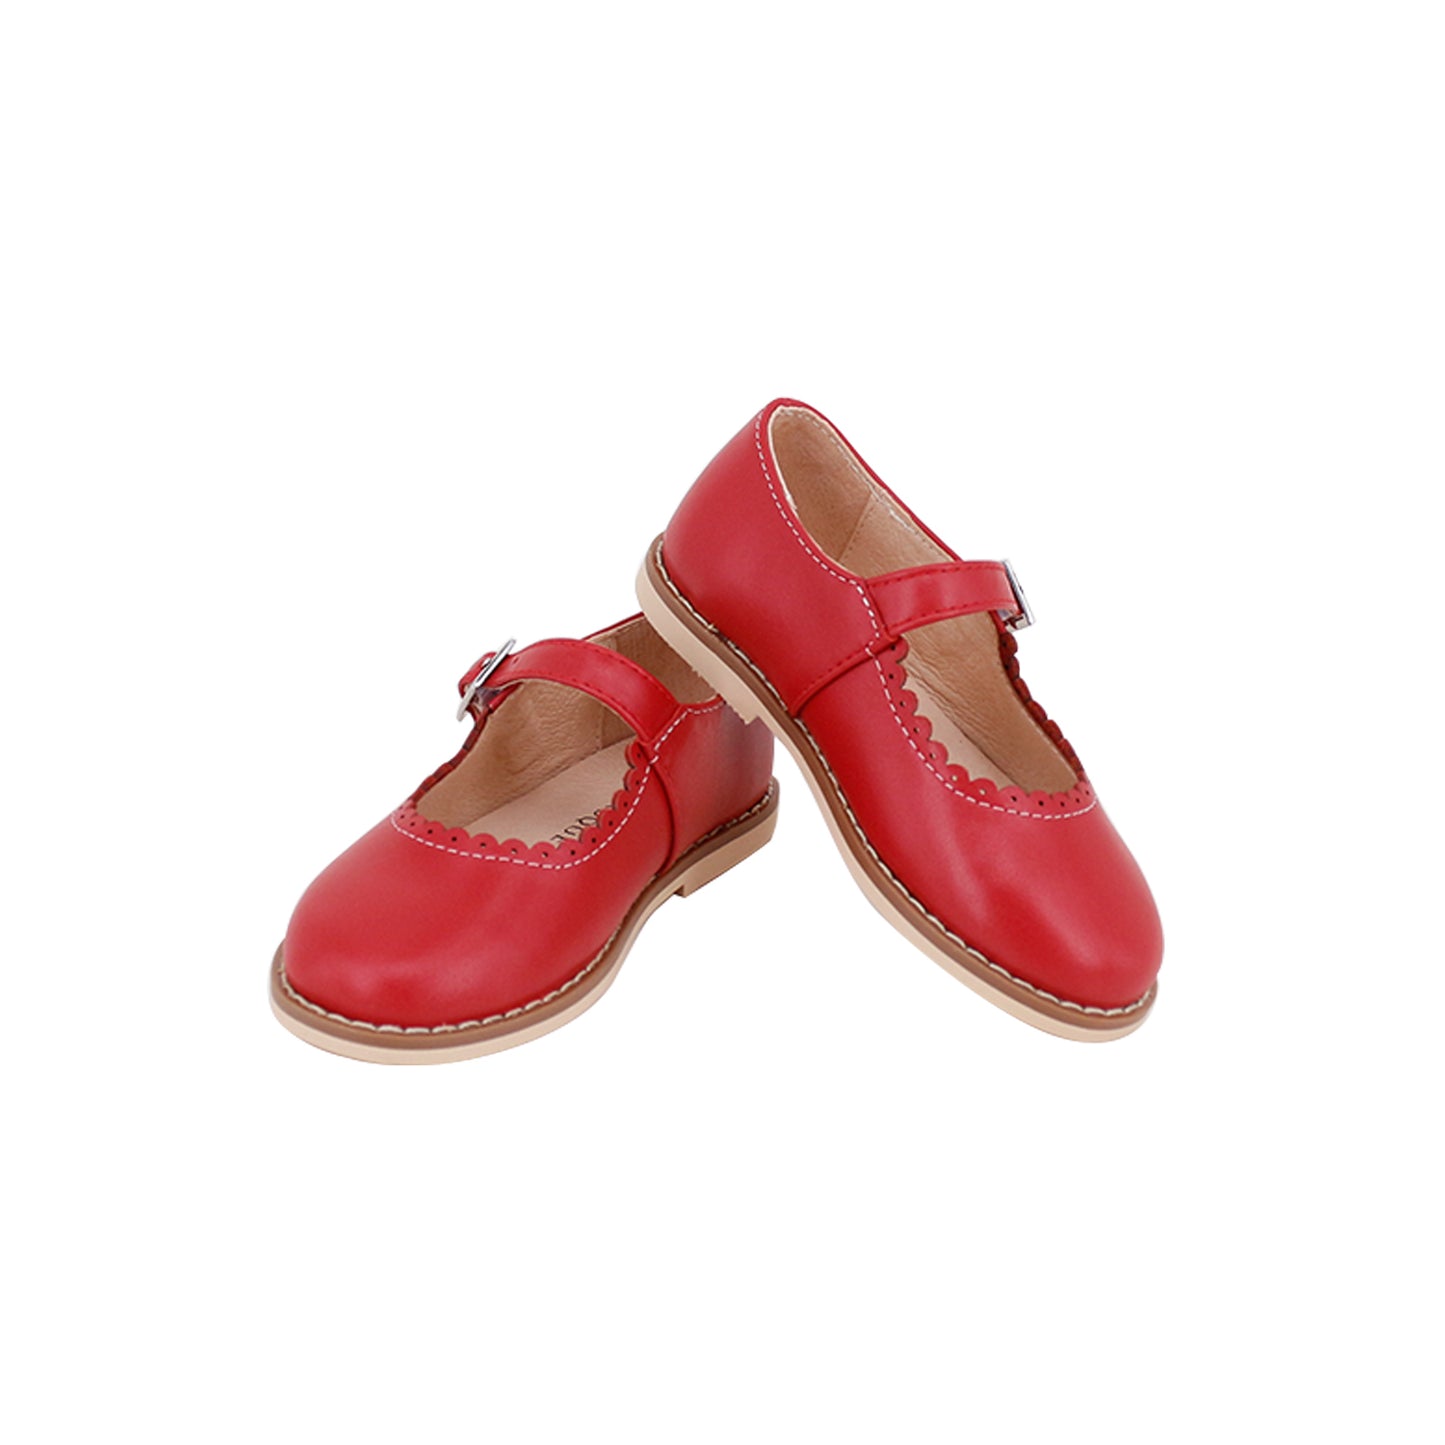 PERROQUET RED LEATHER SCALLOPED MARY JANE